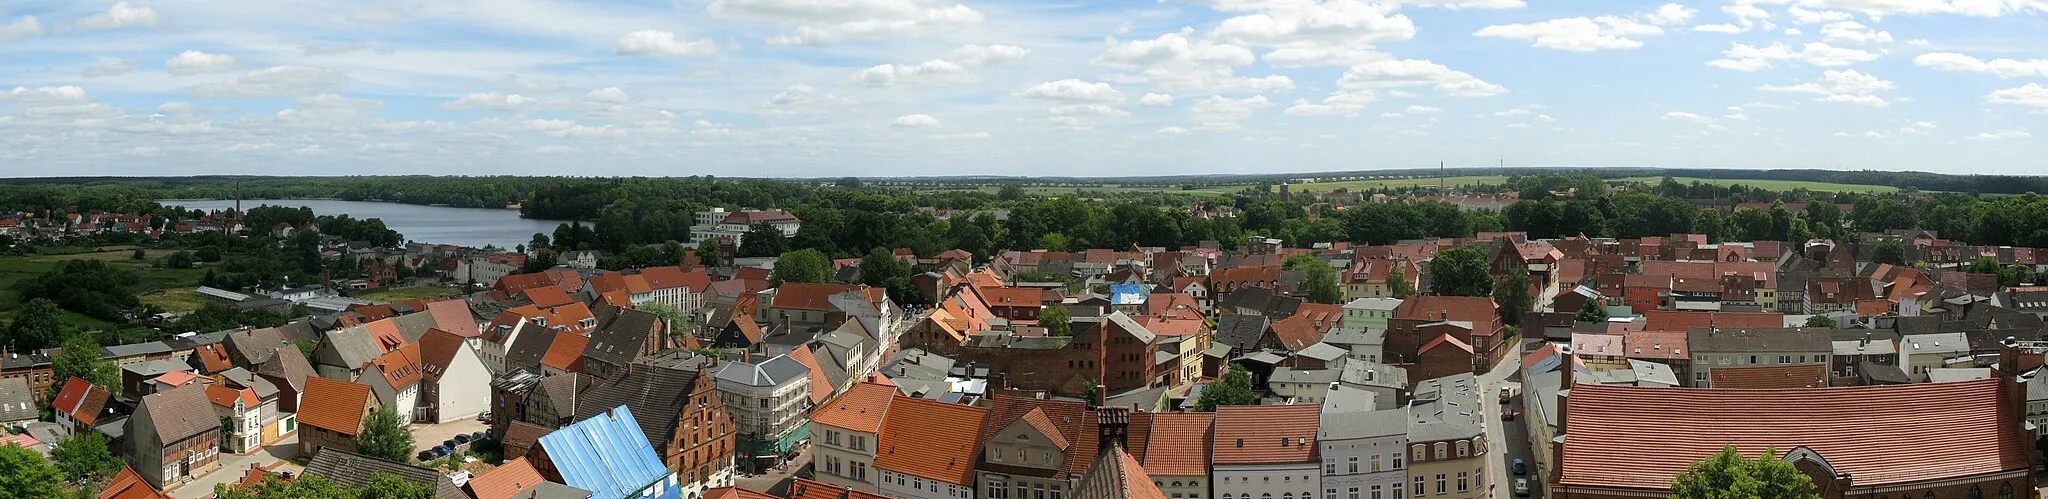 Photo showing: Panoramic of Parchim, view from tower of Church St. Georgen in Parchim, Germany - east side